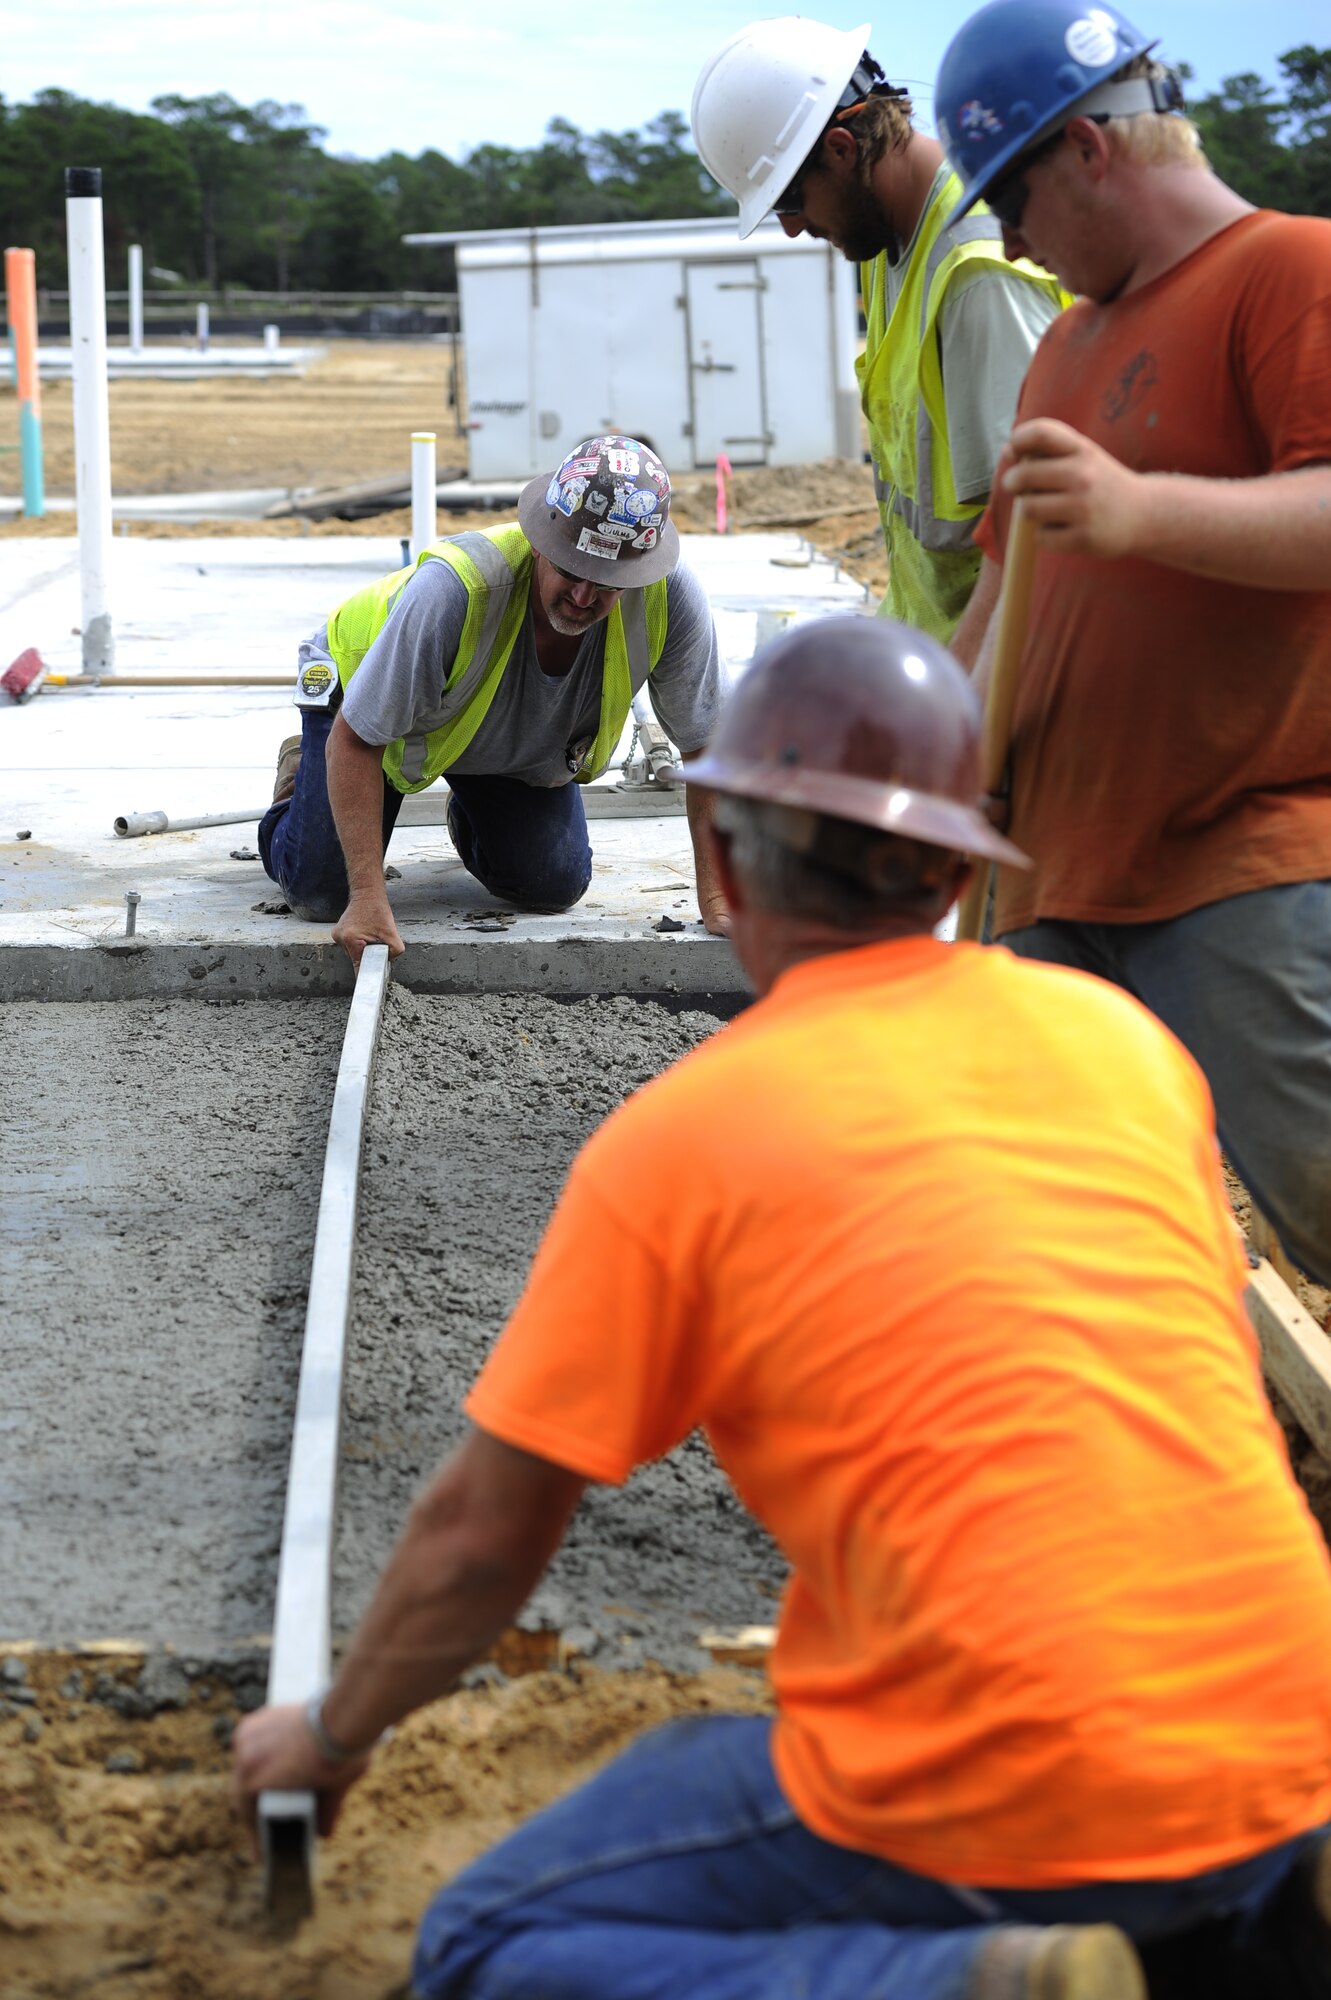 Construction workers use a straightedge to strike off freshly placed concrete at the construction site for the future Osprey neighborhood on Hurlburt Field, Fla., Oct. 2, 2014. Straightedges are used to “strike off” or “screed” concrete, this process removes excess concrete to make it as level as possible before finishing. (U.S. Air Force photo/Staff Sgt. Sarah Hanson)